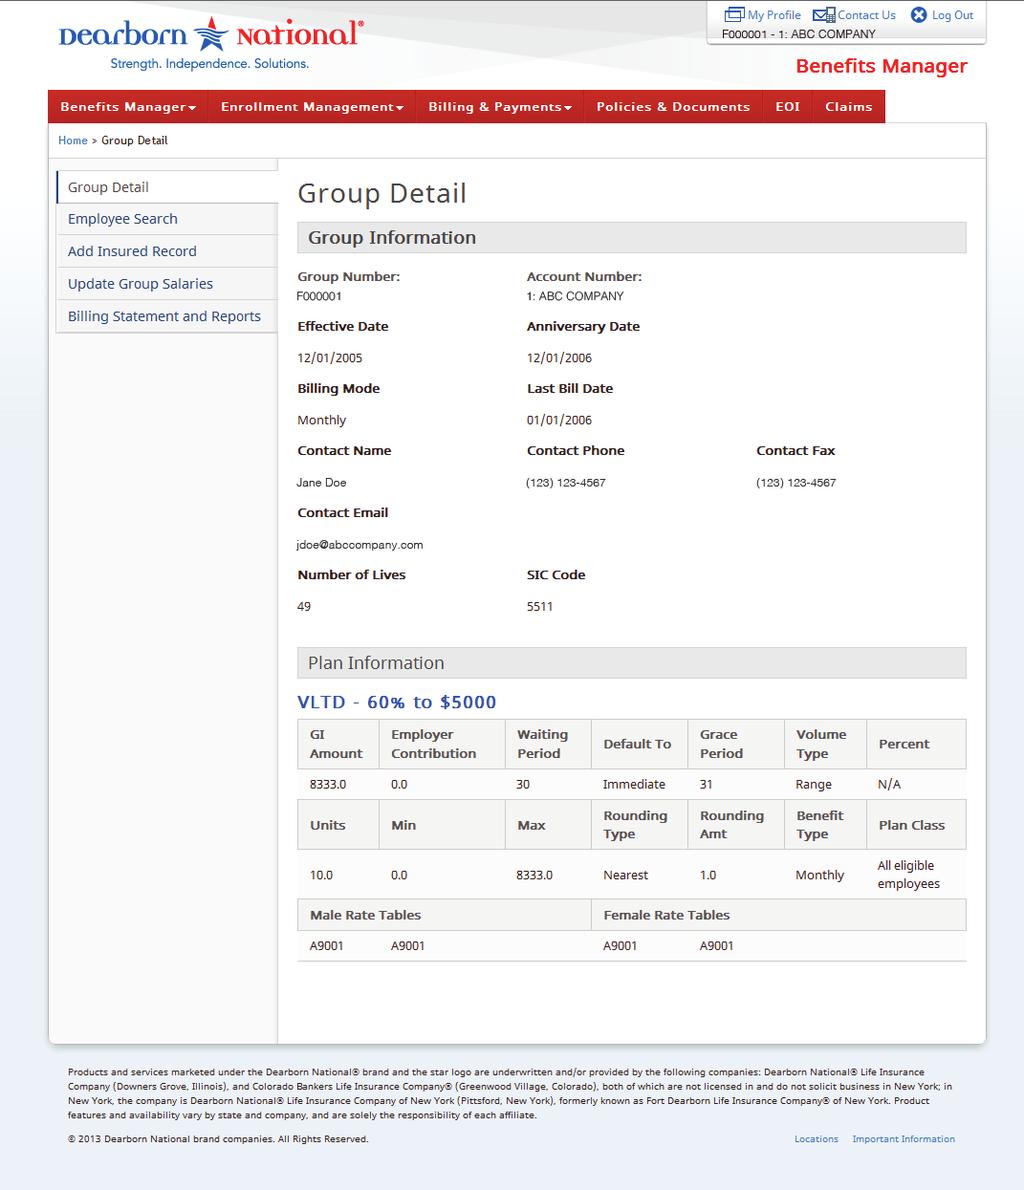 Group and Plan Information: Step 4: Click on the Group Detail link in the